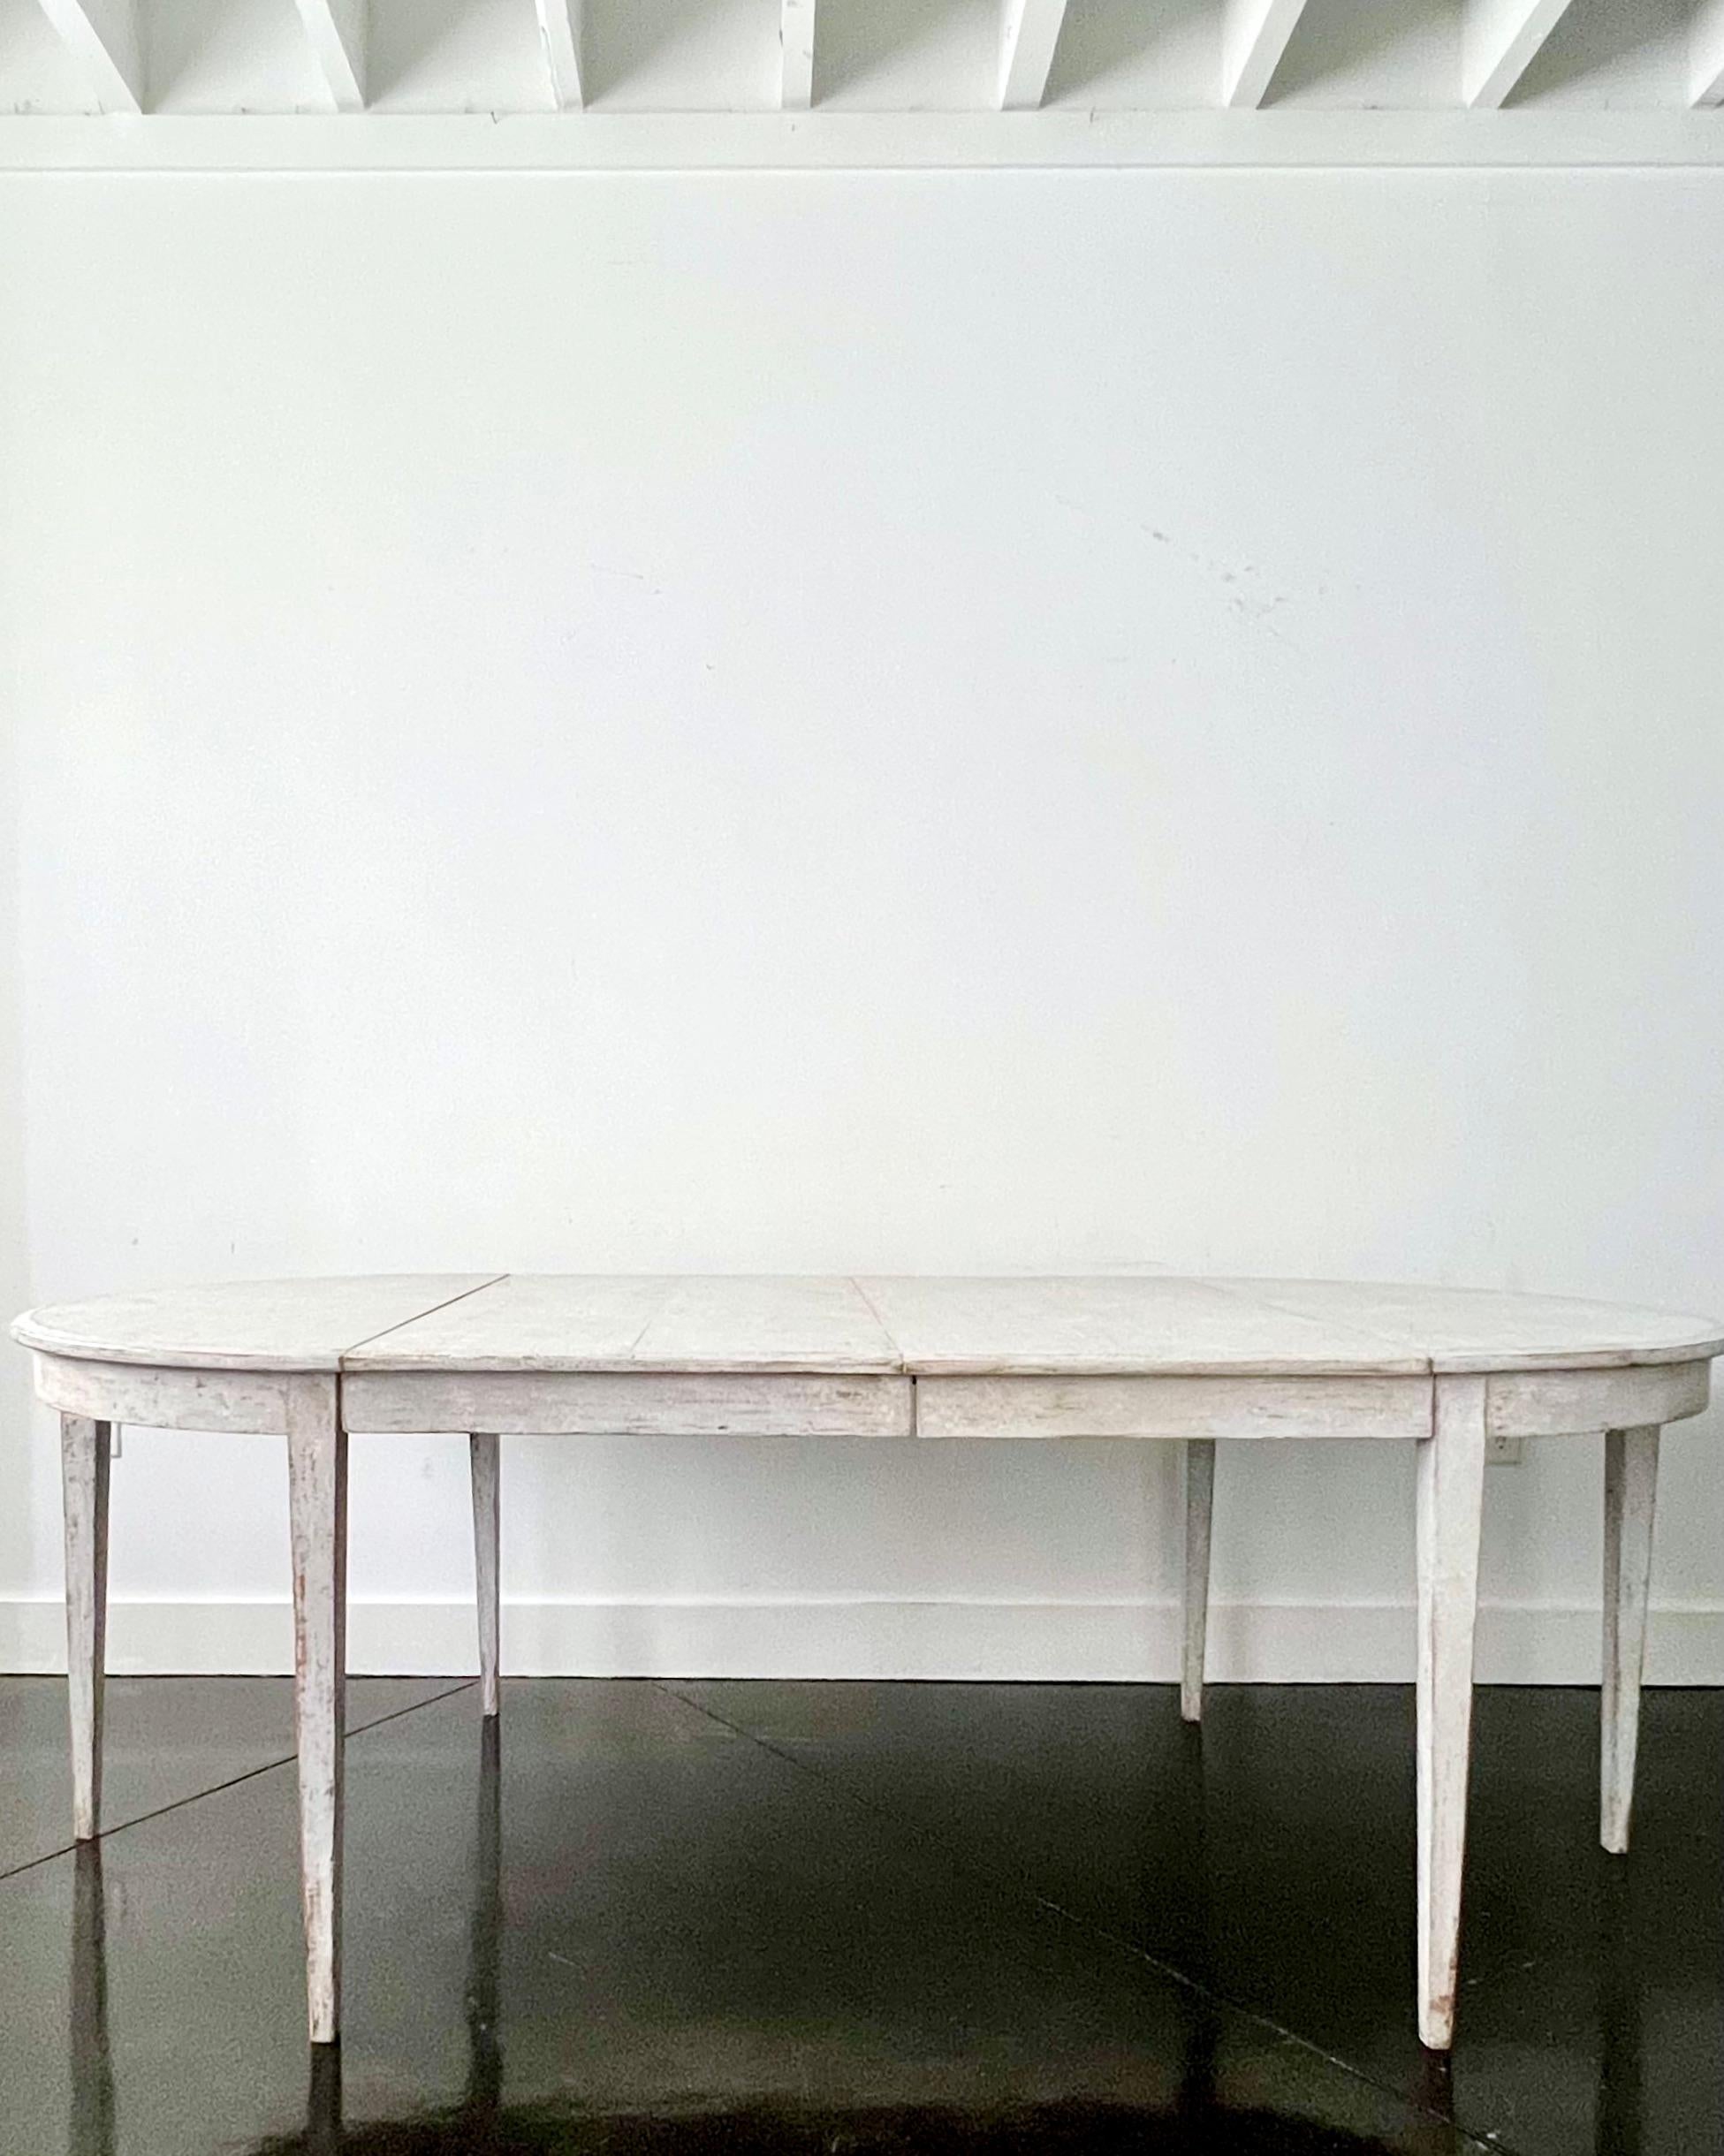 Early 19th century later painted Gustavian period extending table with two leaves and tapered legs. A practical piece that can be used as round table or extended with one or two leaves up to 90